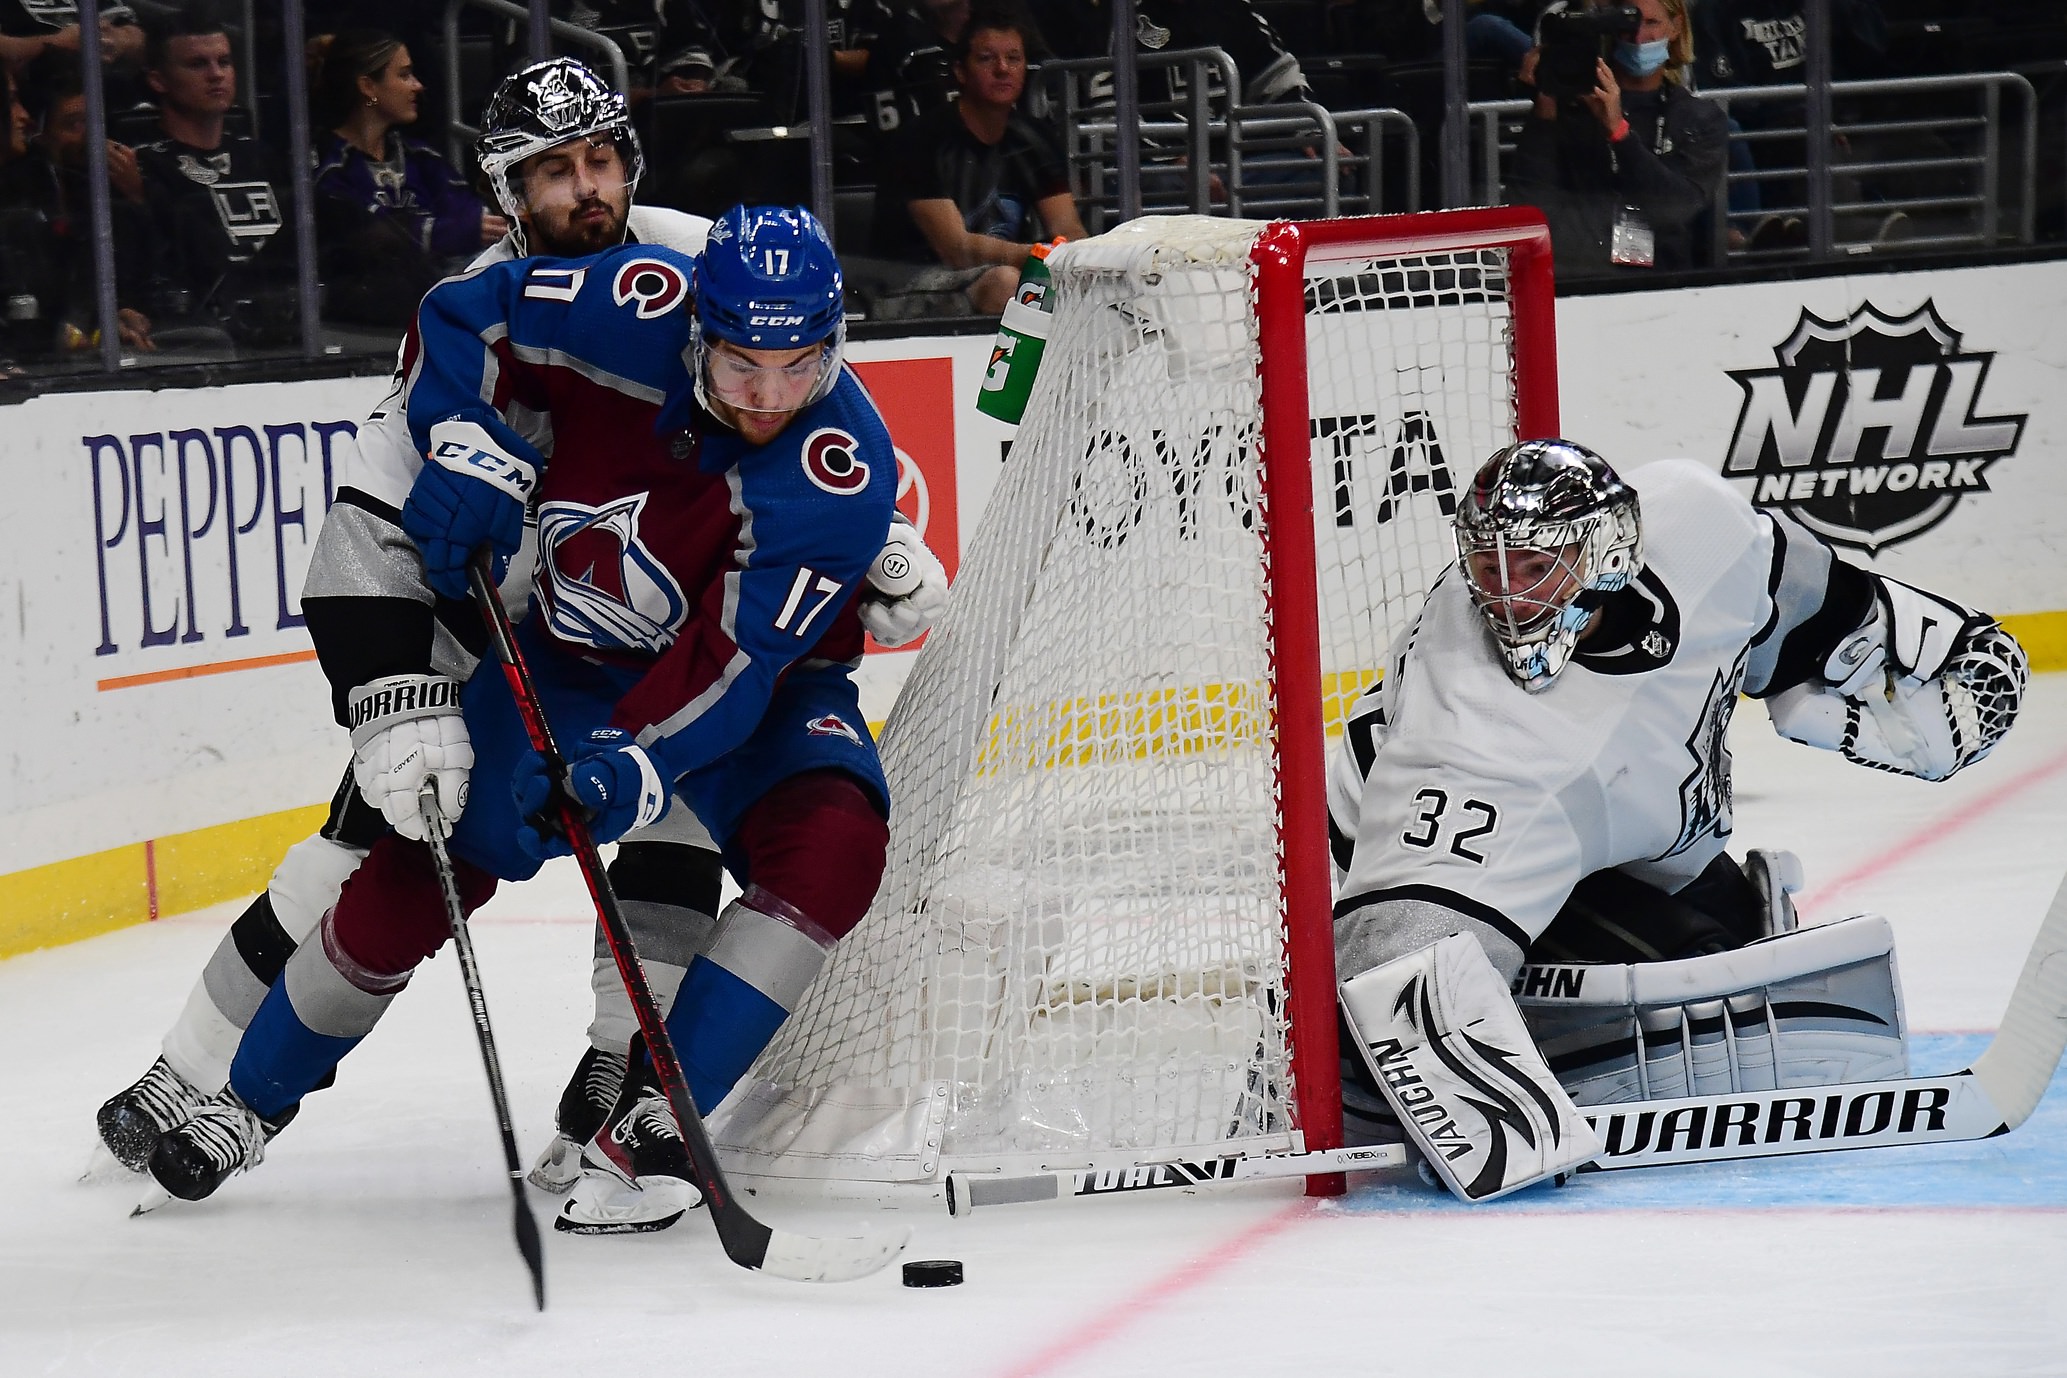 Colorado Avalanche center Tyson Jost (17) moves in for a shot on goal against Los Angeles Kings goaltender Jonathan Quick (32) and center Phillip Danault (24)